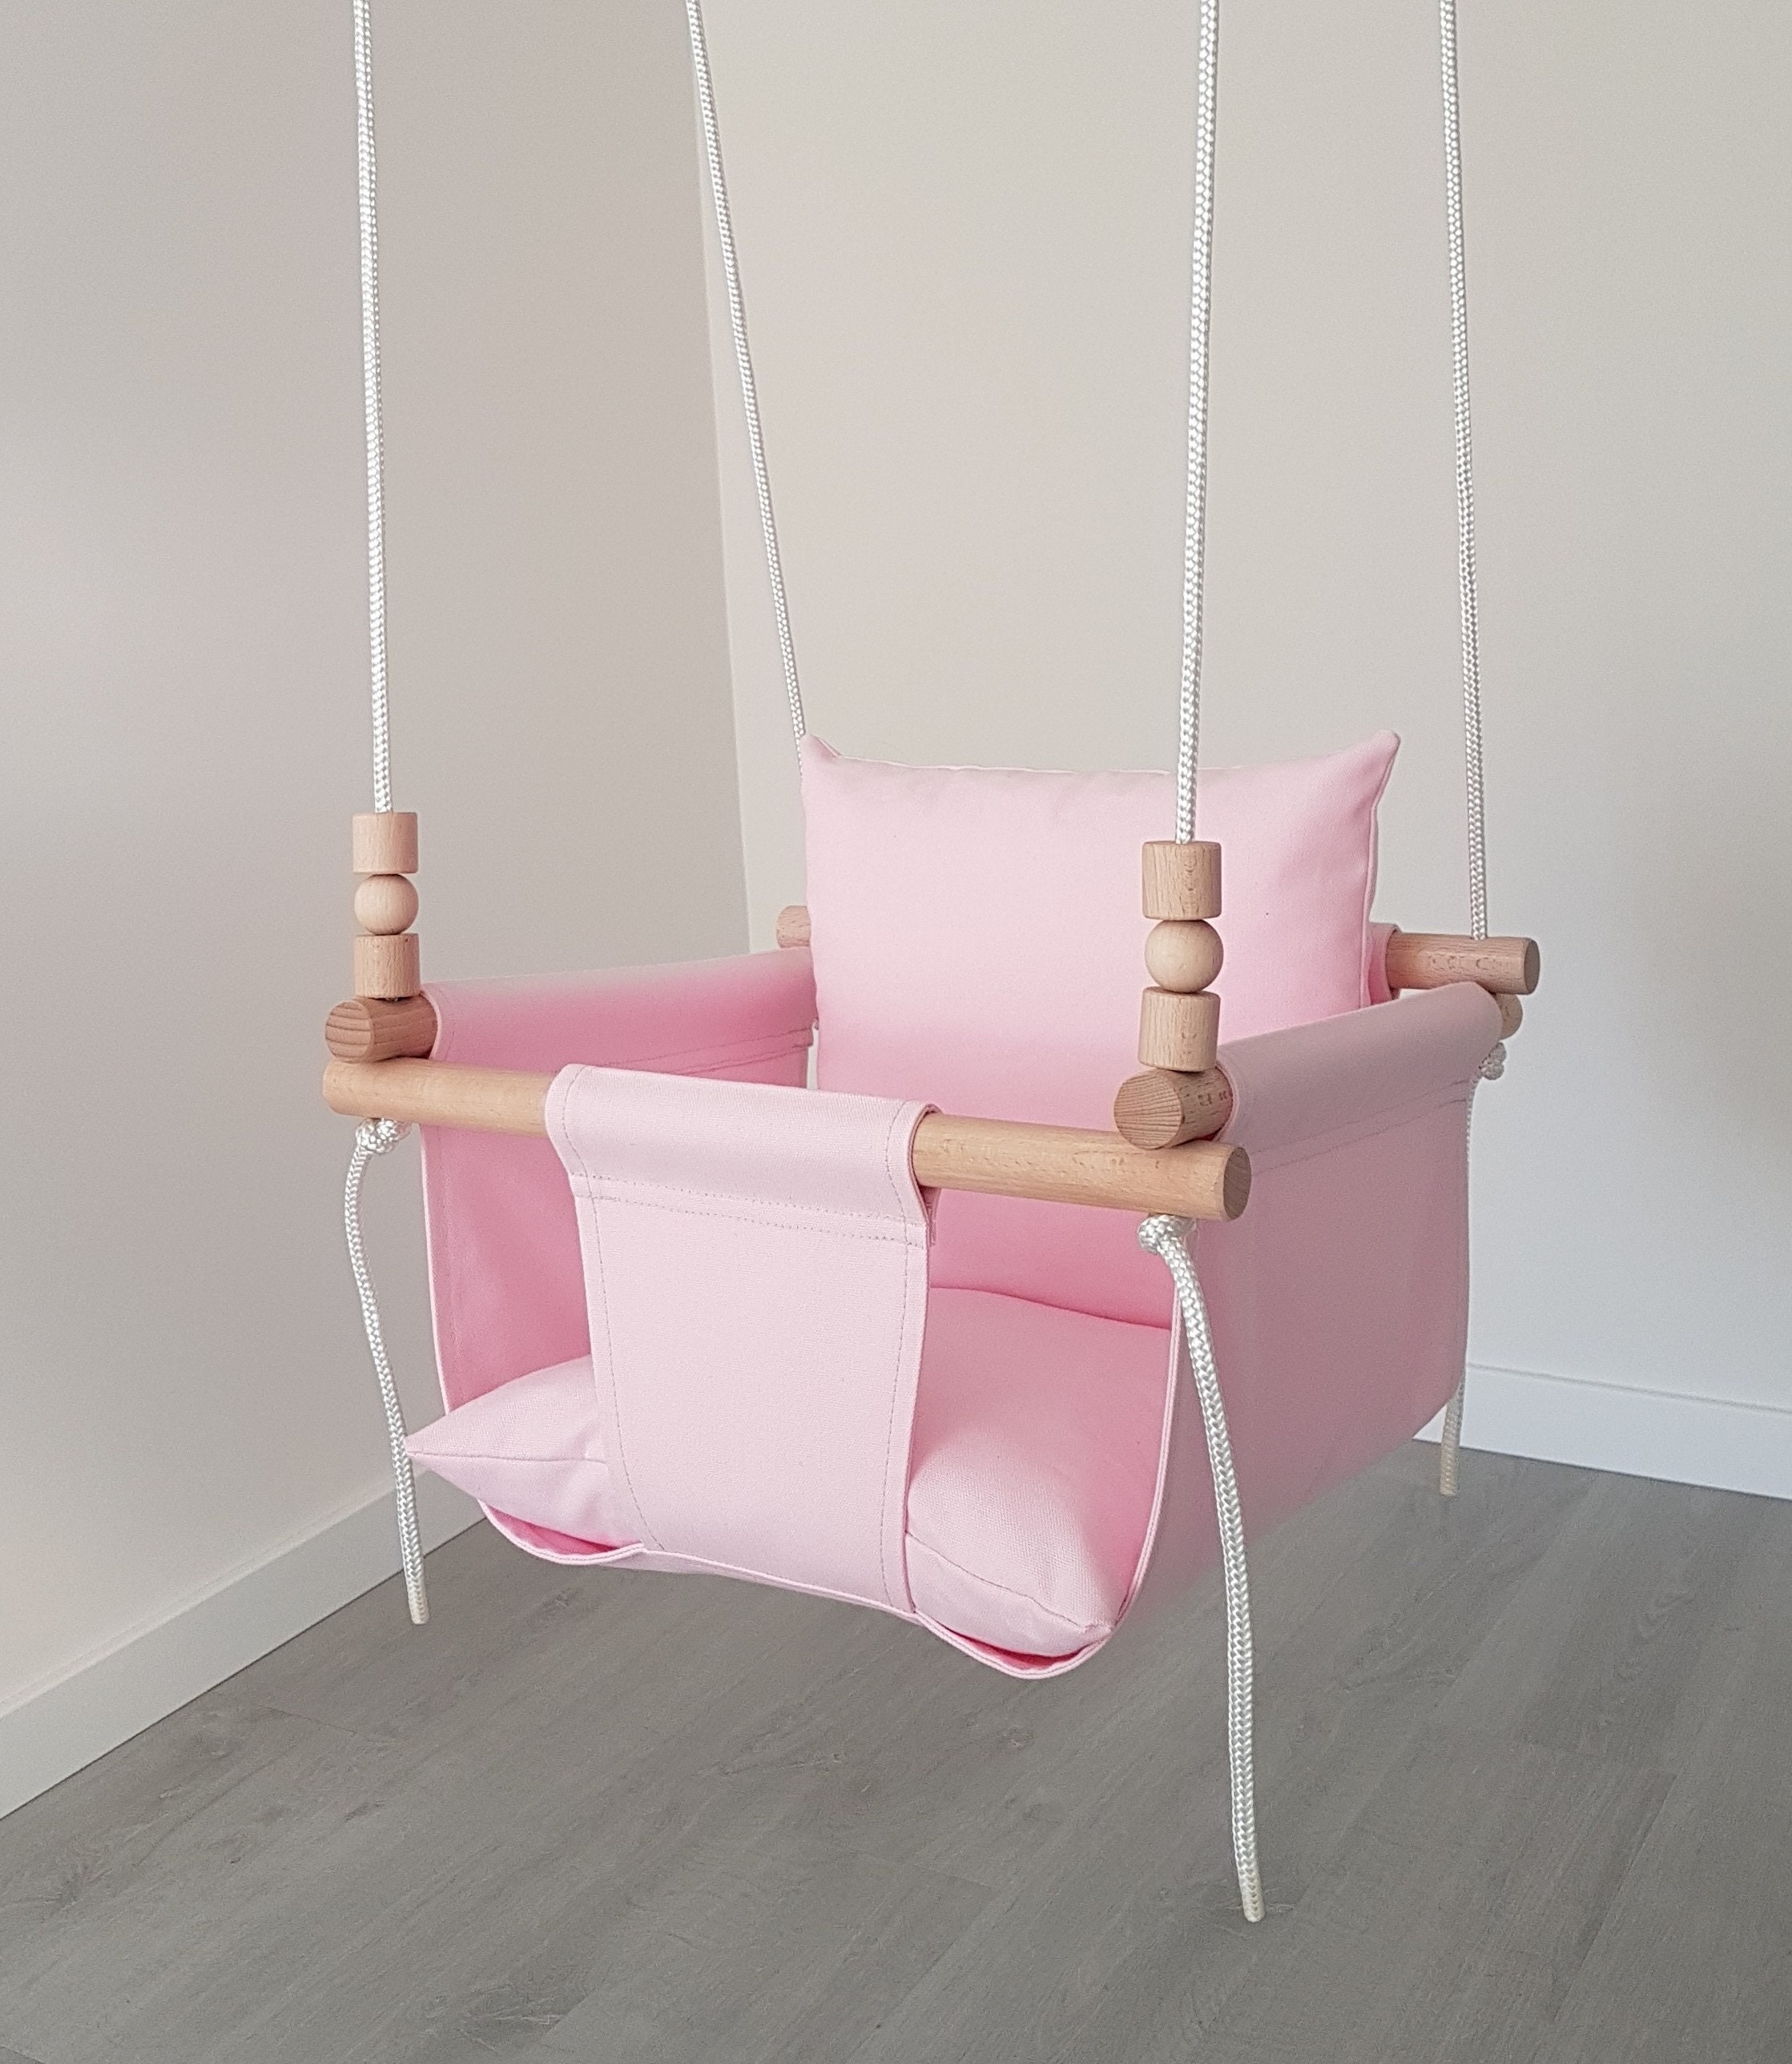 pink baby swing